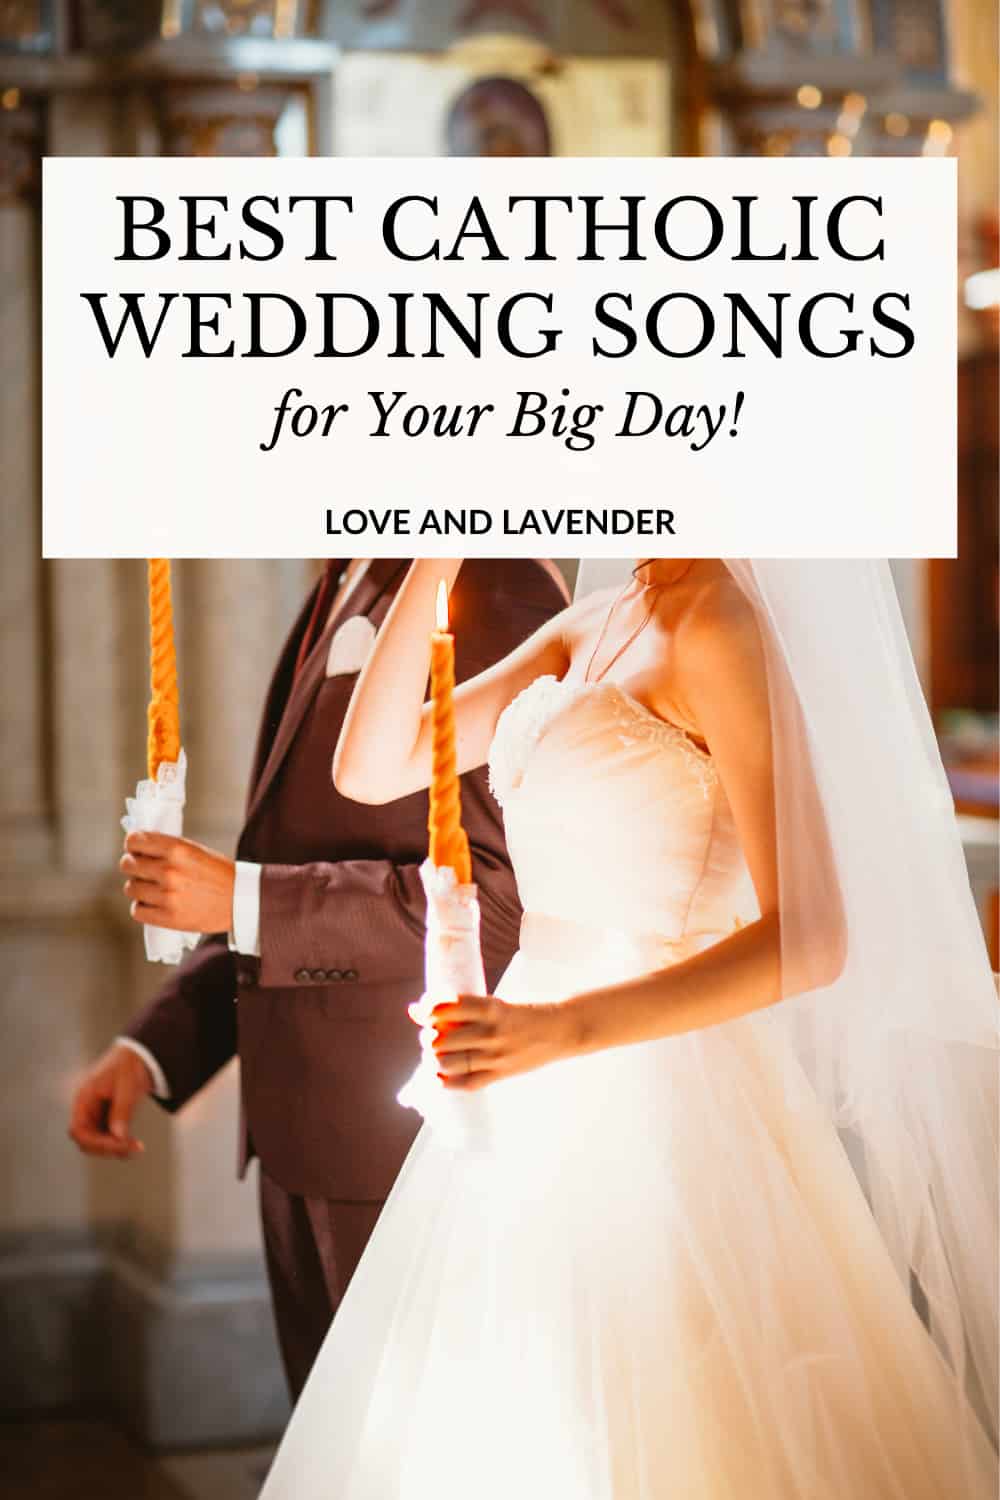 how long is a catholic wedding service